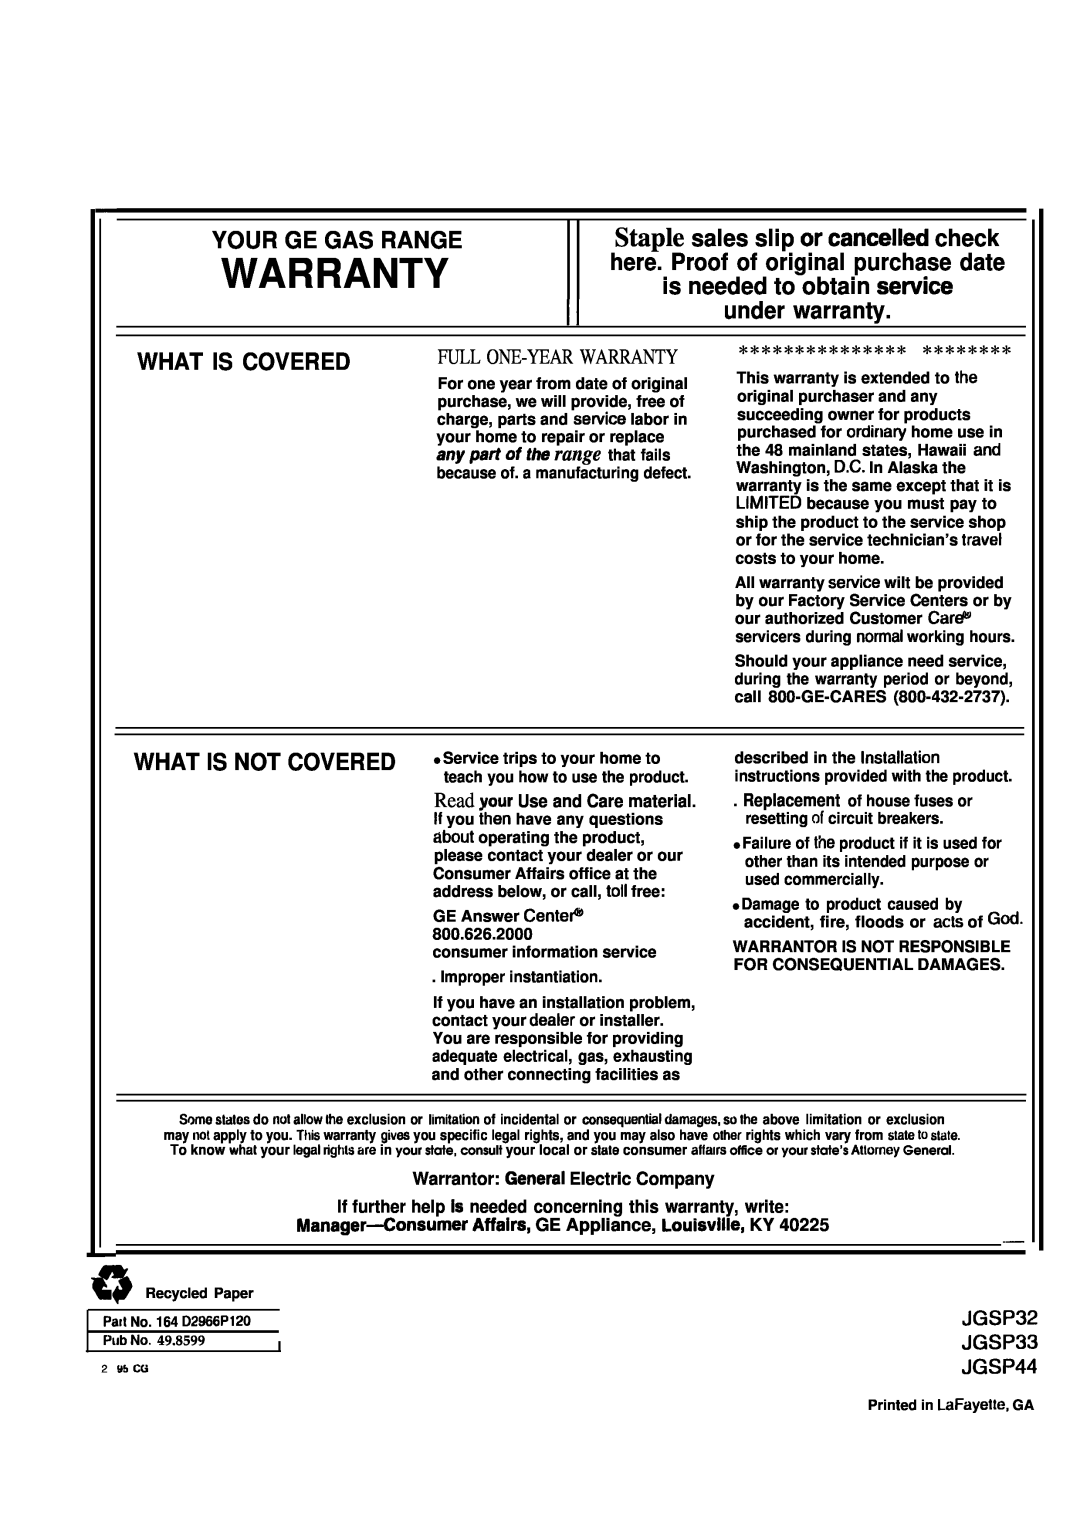 GE JGSP32 Warranty, Your Ge Gas Range, Staple sales slip or cancelled check, here. Proof of original purchase date, JGSP33 